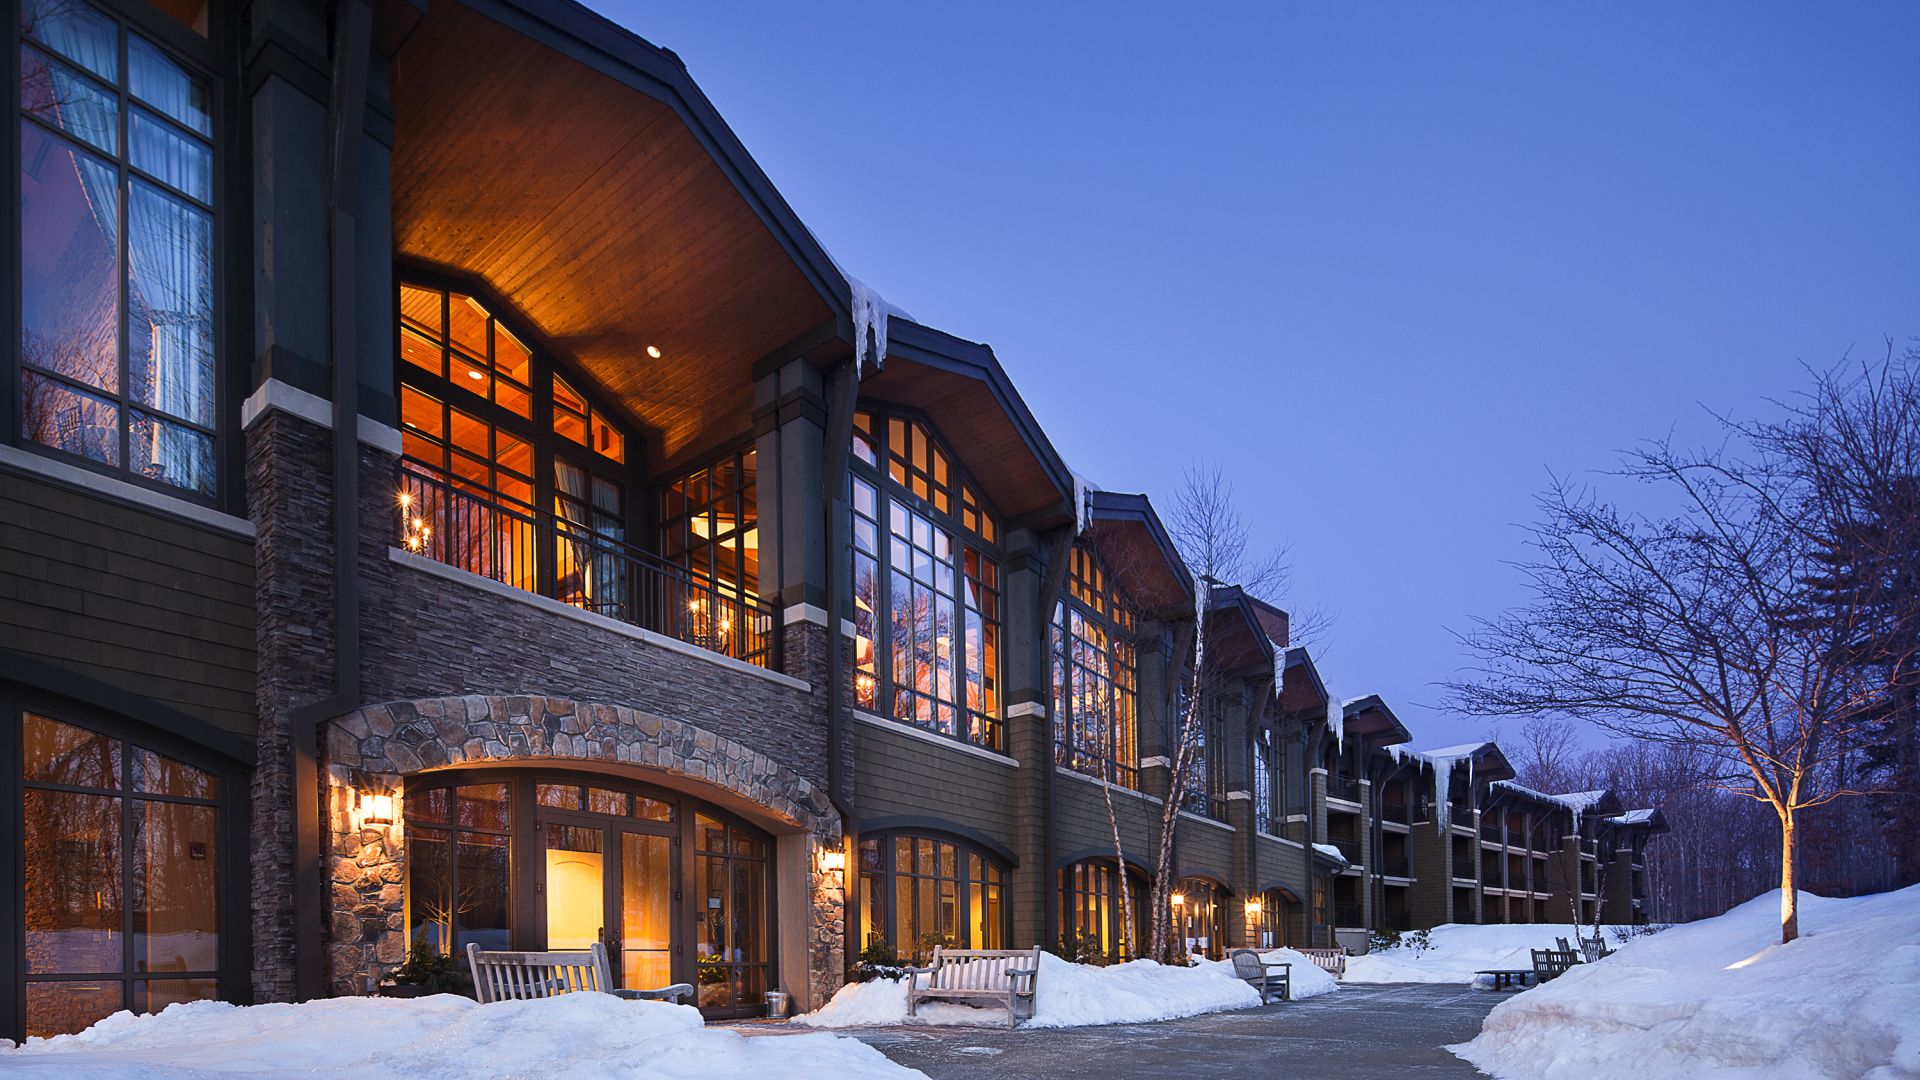 Back exterior view of The Lodge at Woodloch at dusk in Winter